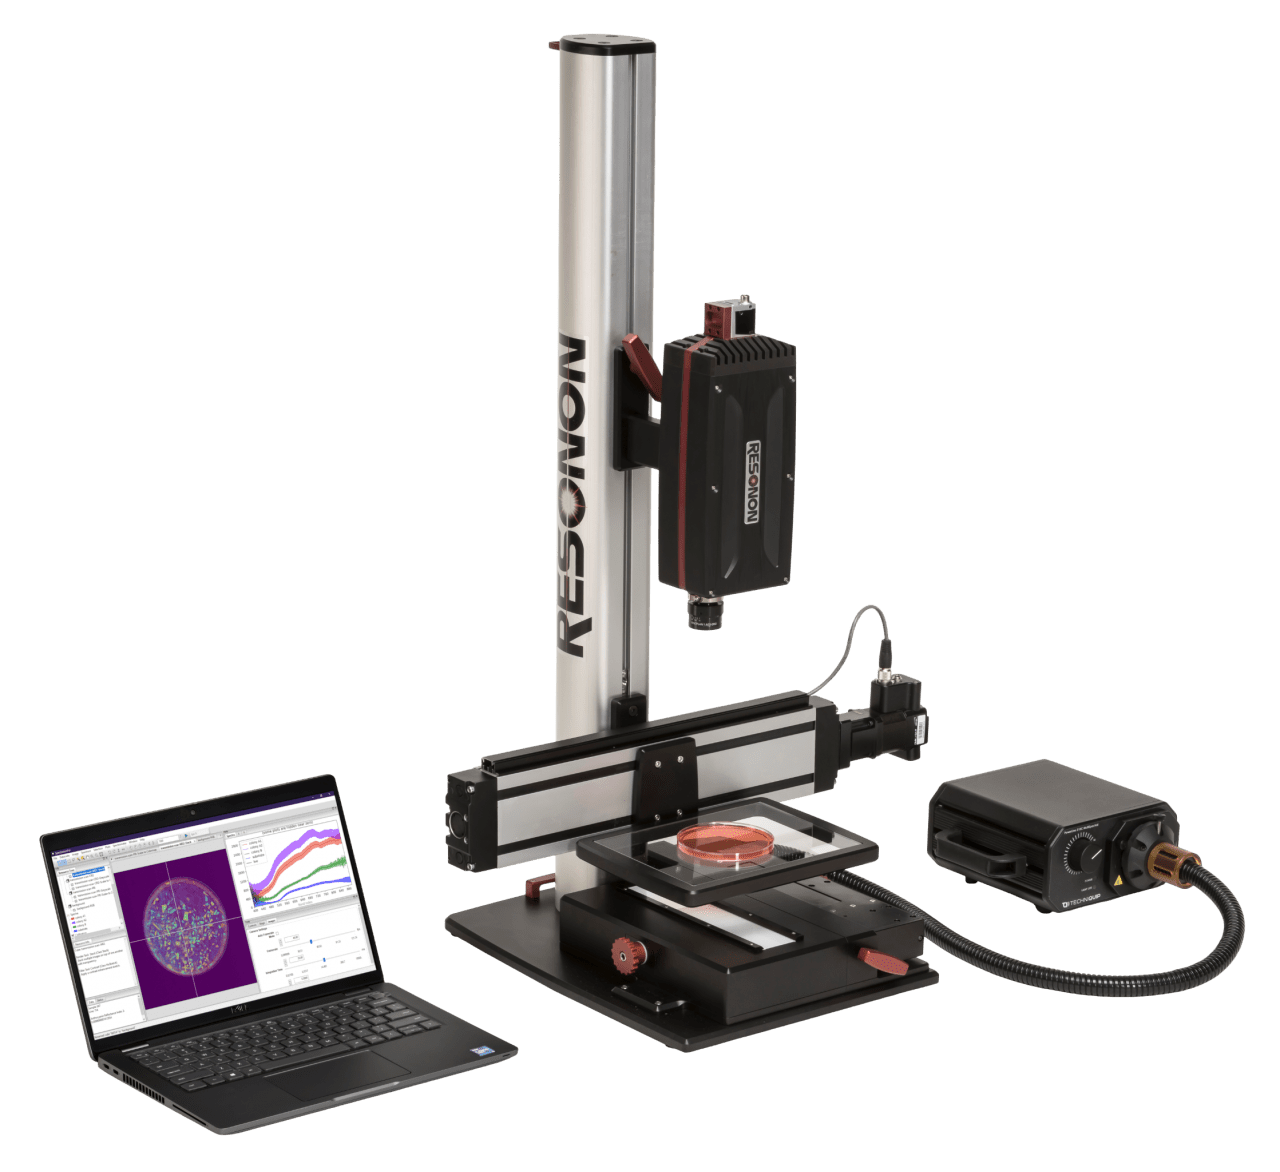 Resonon Benchtop Hyperspectral Imaging System